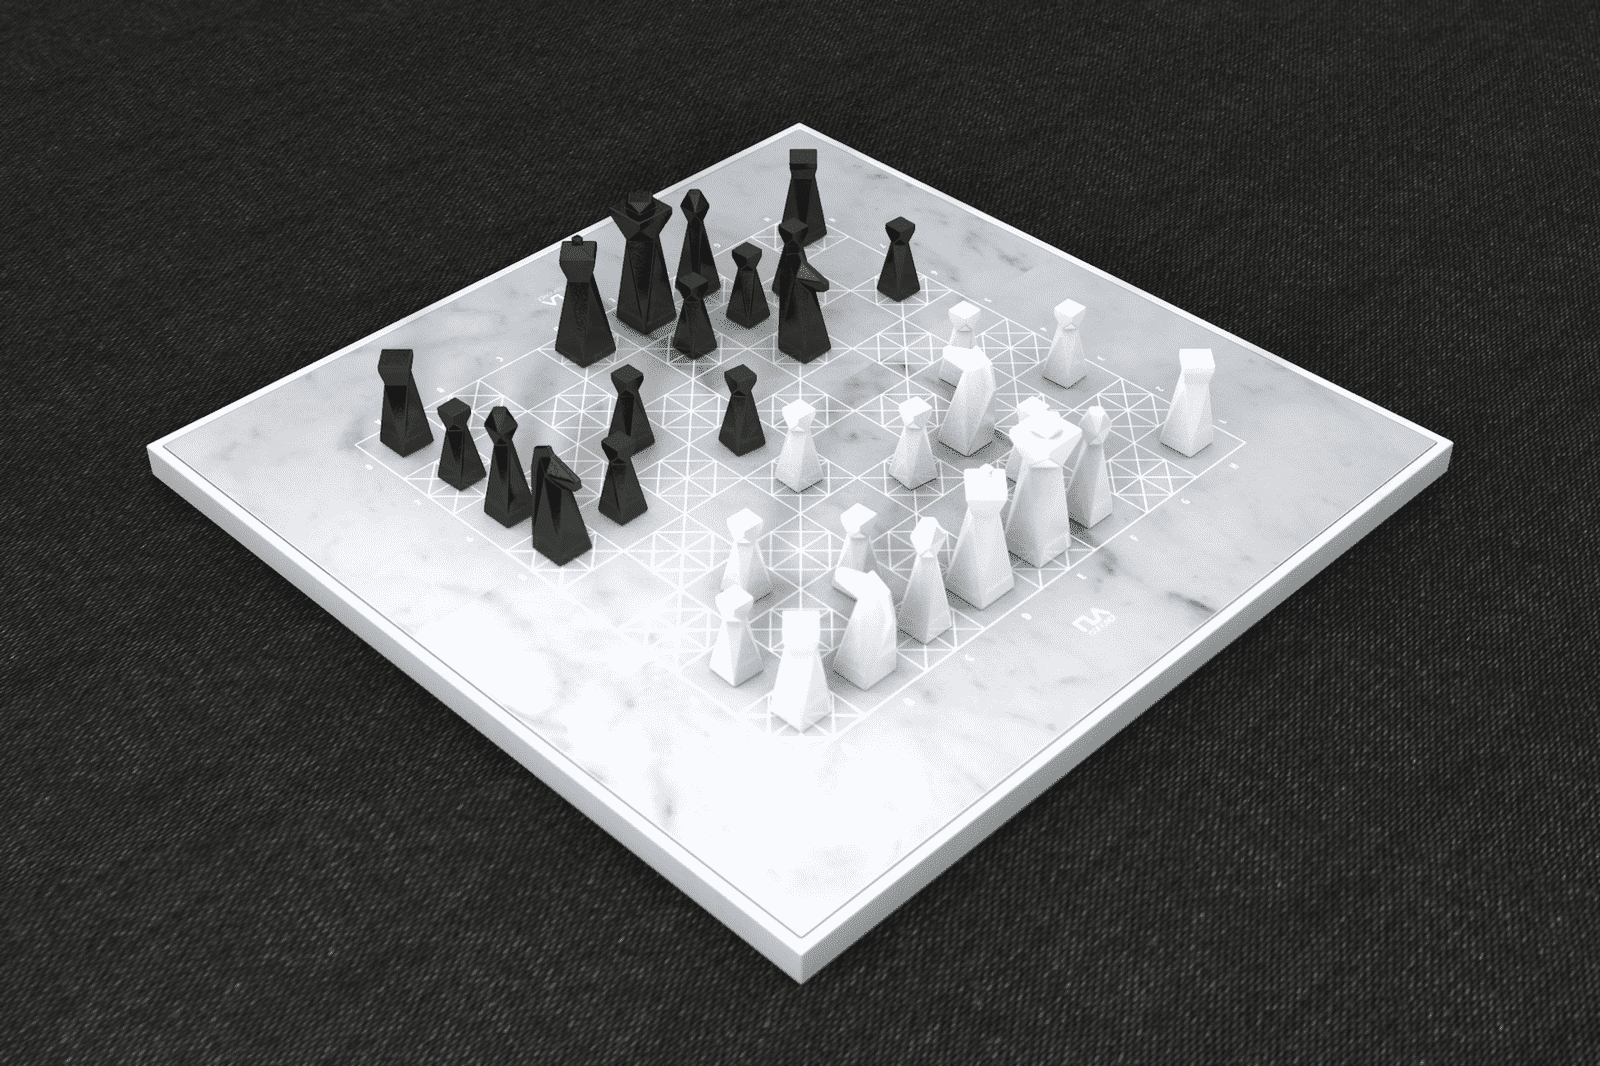 Gray Marble Luxury Chess Set - Custom Chess Board - Weighted Resin